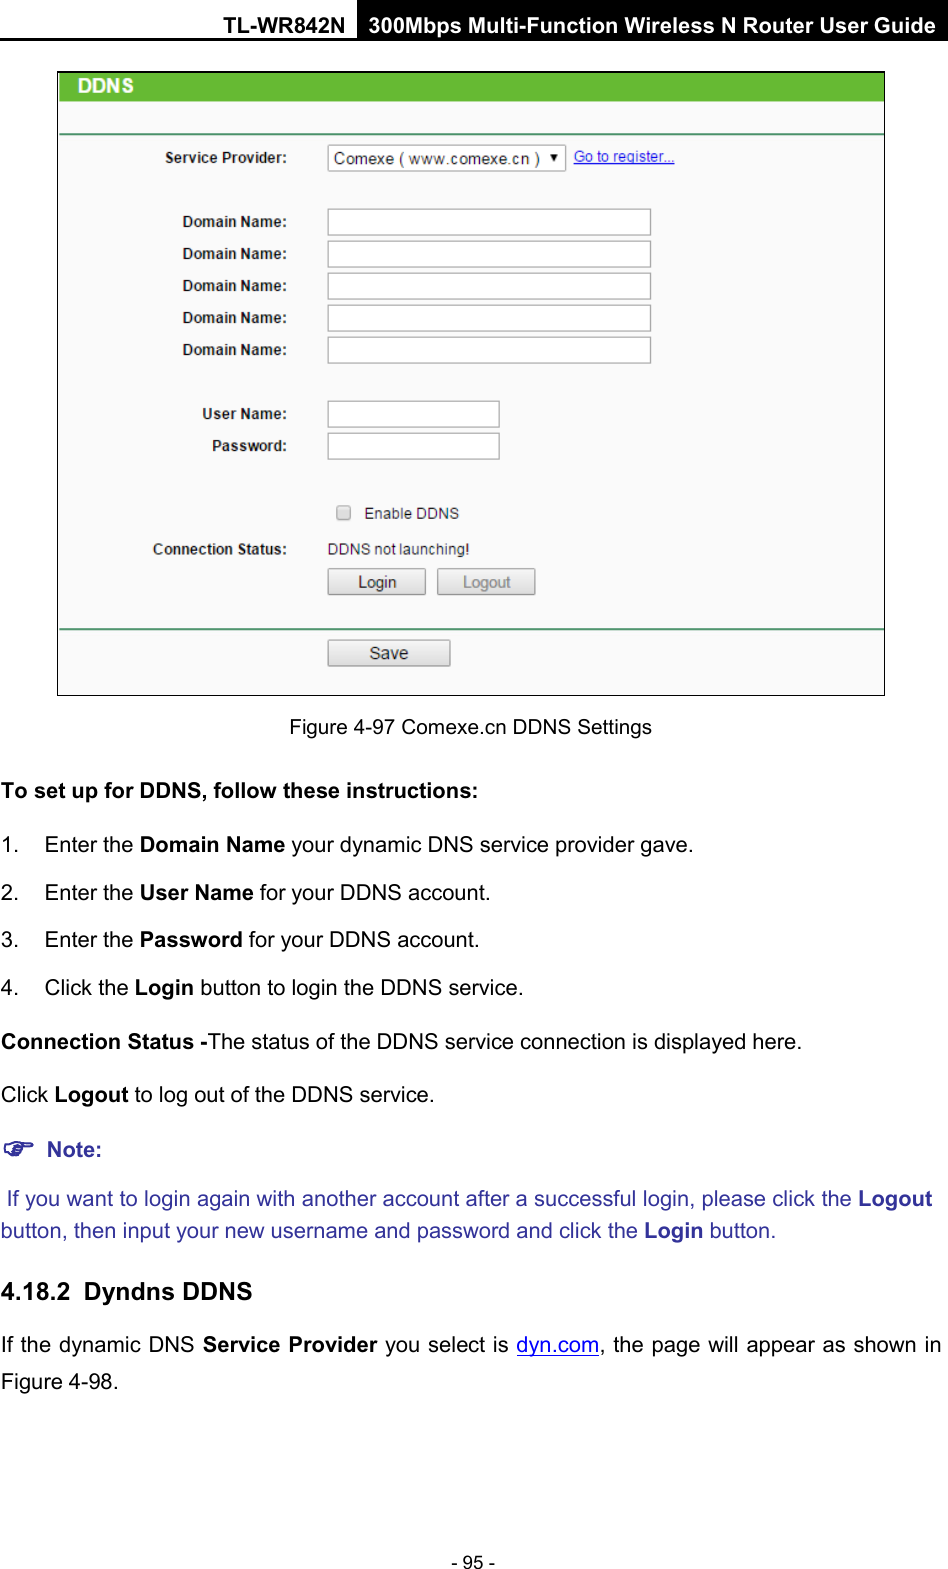 TL-WR842N 300Mbps Multi-Function Wireless N Router User Guide  - 95 -  Figure 4-97 Comexe.cn DDNS Settings To set up for DDNS, follow these instructions: 1. Enter the Domain Name your dynamic DNS service provider gave.   2. Enter the User Name for your DDNS account.   3. Enter the Password for your DDNS account.   4. Click the Login button to login the DDNS service.   Connection Status -The status of the DDNS service connection is displayed here. Click Logout to log out of the DDNS service.    Note:  If you want to login again with another account after a successful login, please click the Logout button, then input your new username and password and click the Login button. 4.18.2 Dyndns DDNS If the dynamic DNS Service Provider you select is dyn.com, the page will appear as shown in Figure 4-98. 